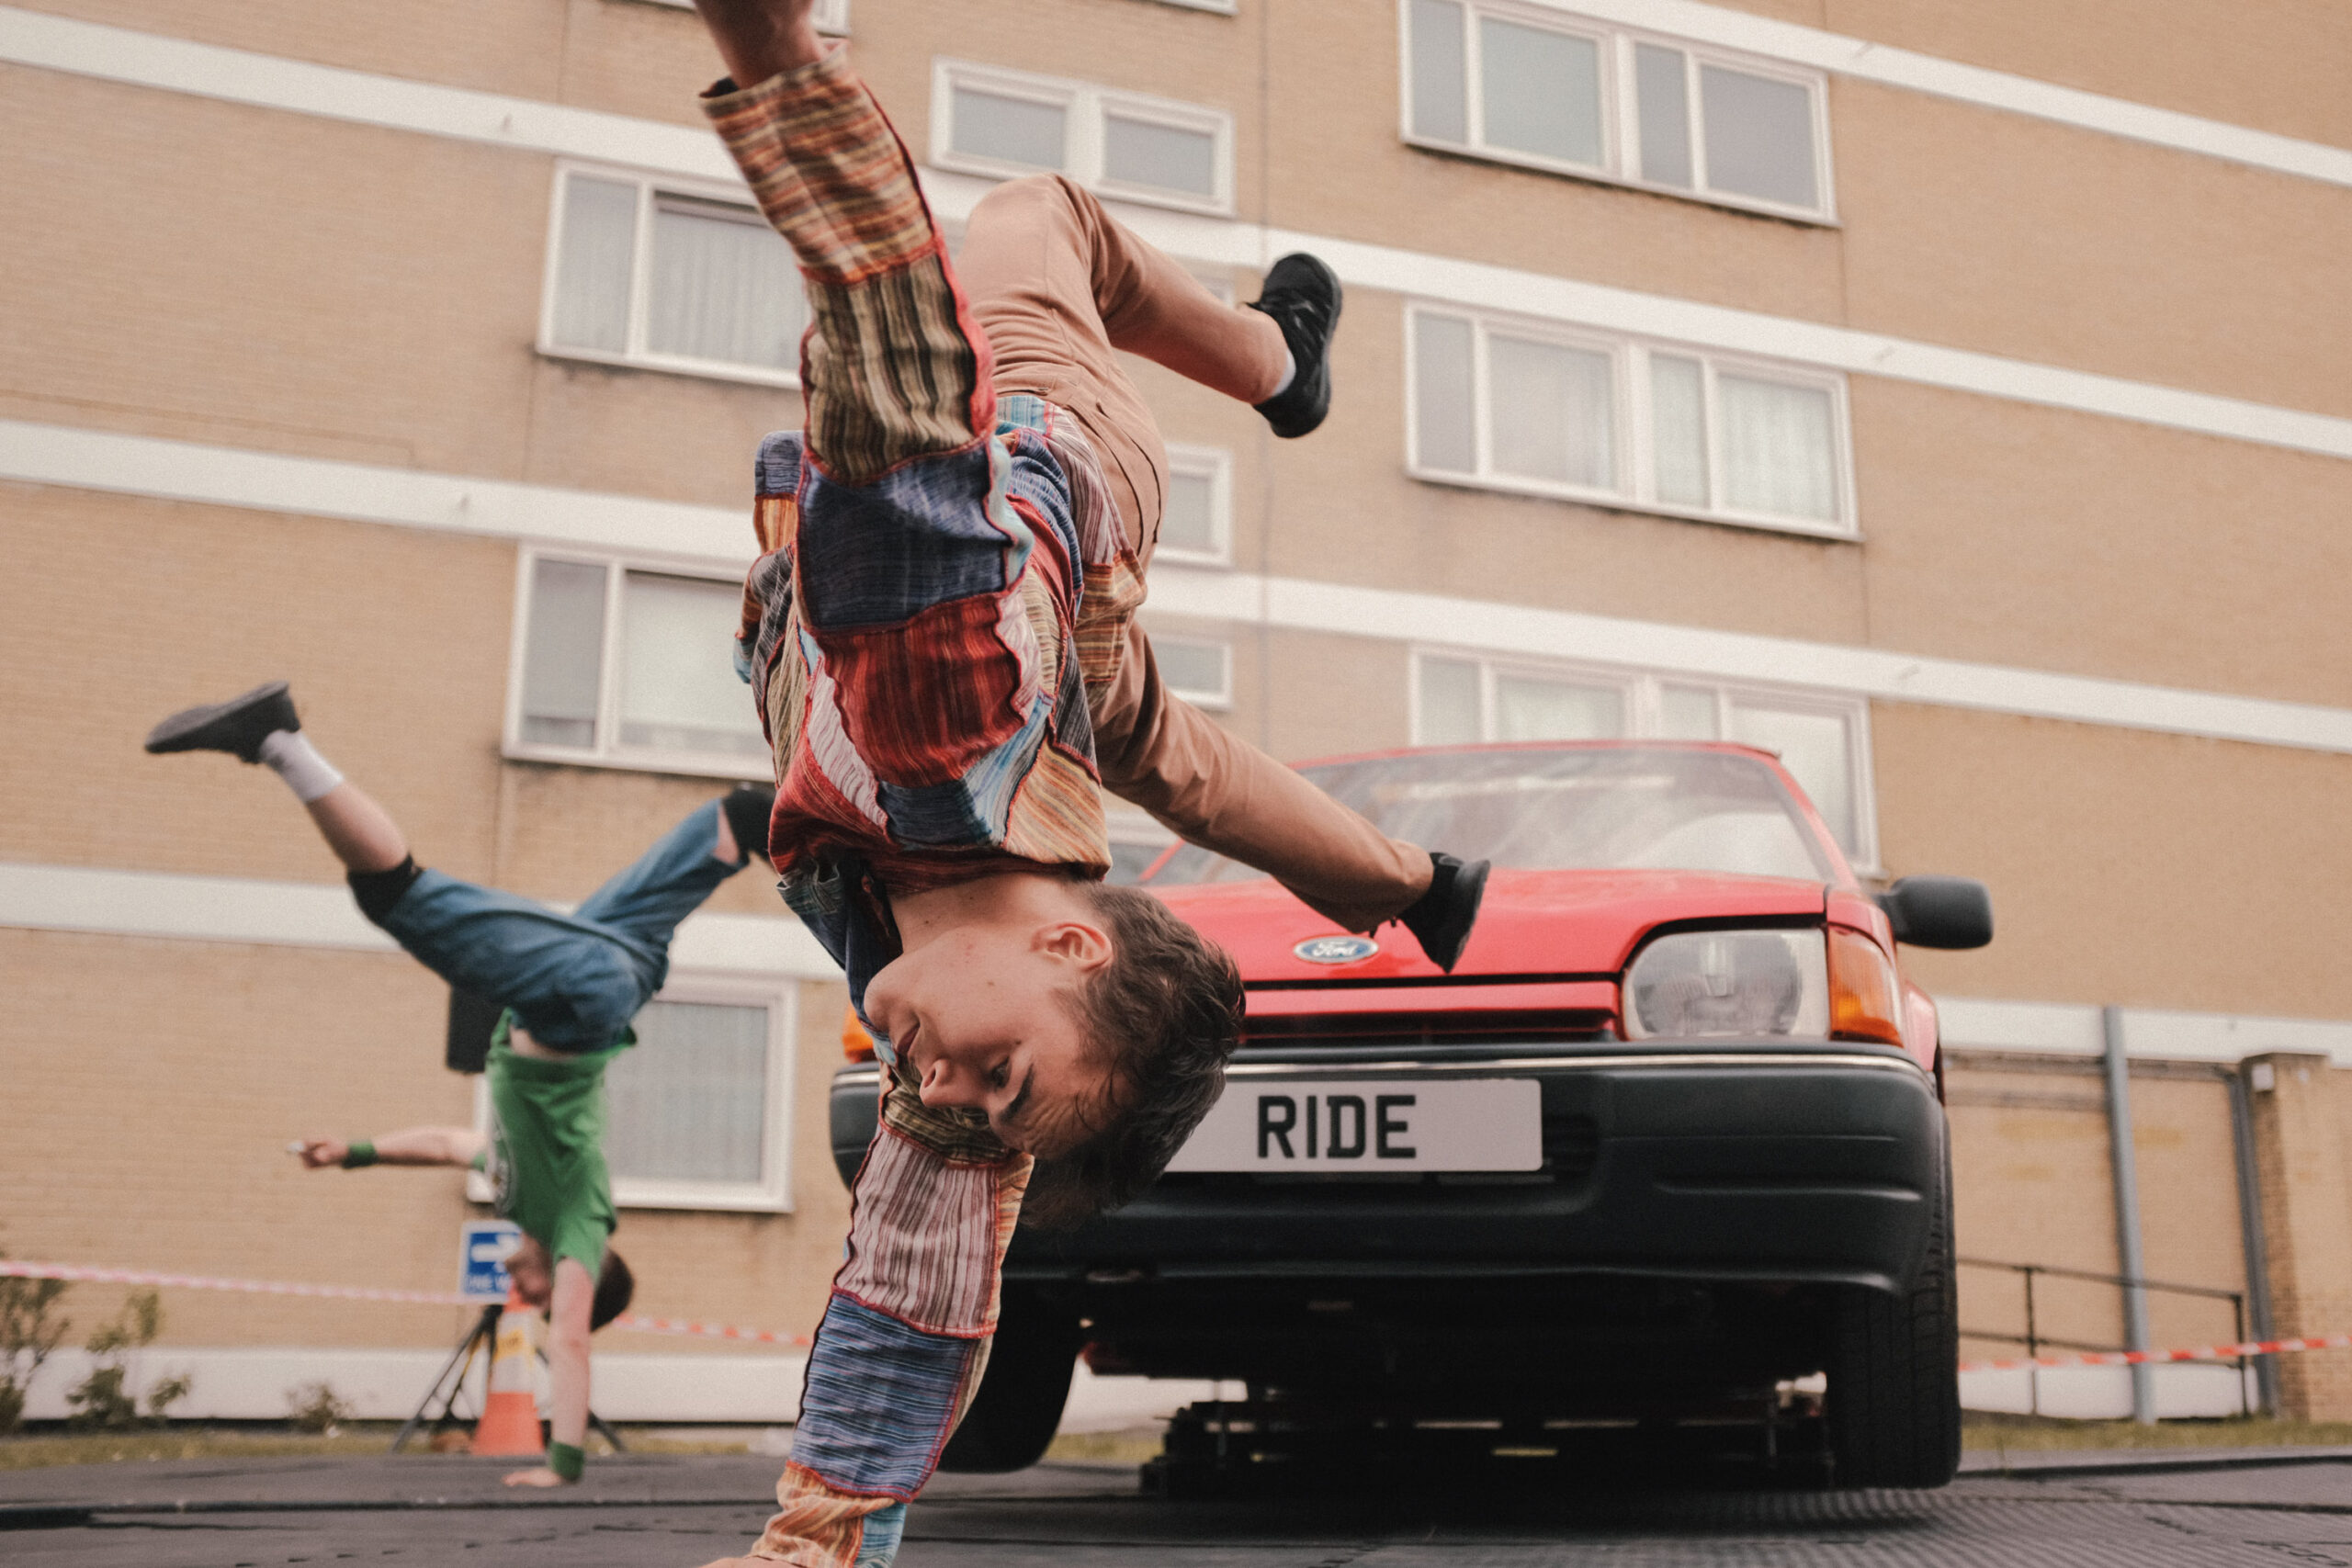 An image of a dance performance in the middle of a 60s looking housing estate in Southampton. In the middle of the performance space is a 1980s red car and the dancers are flipping off each side of it